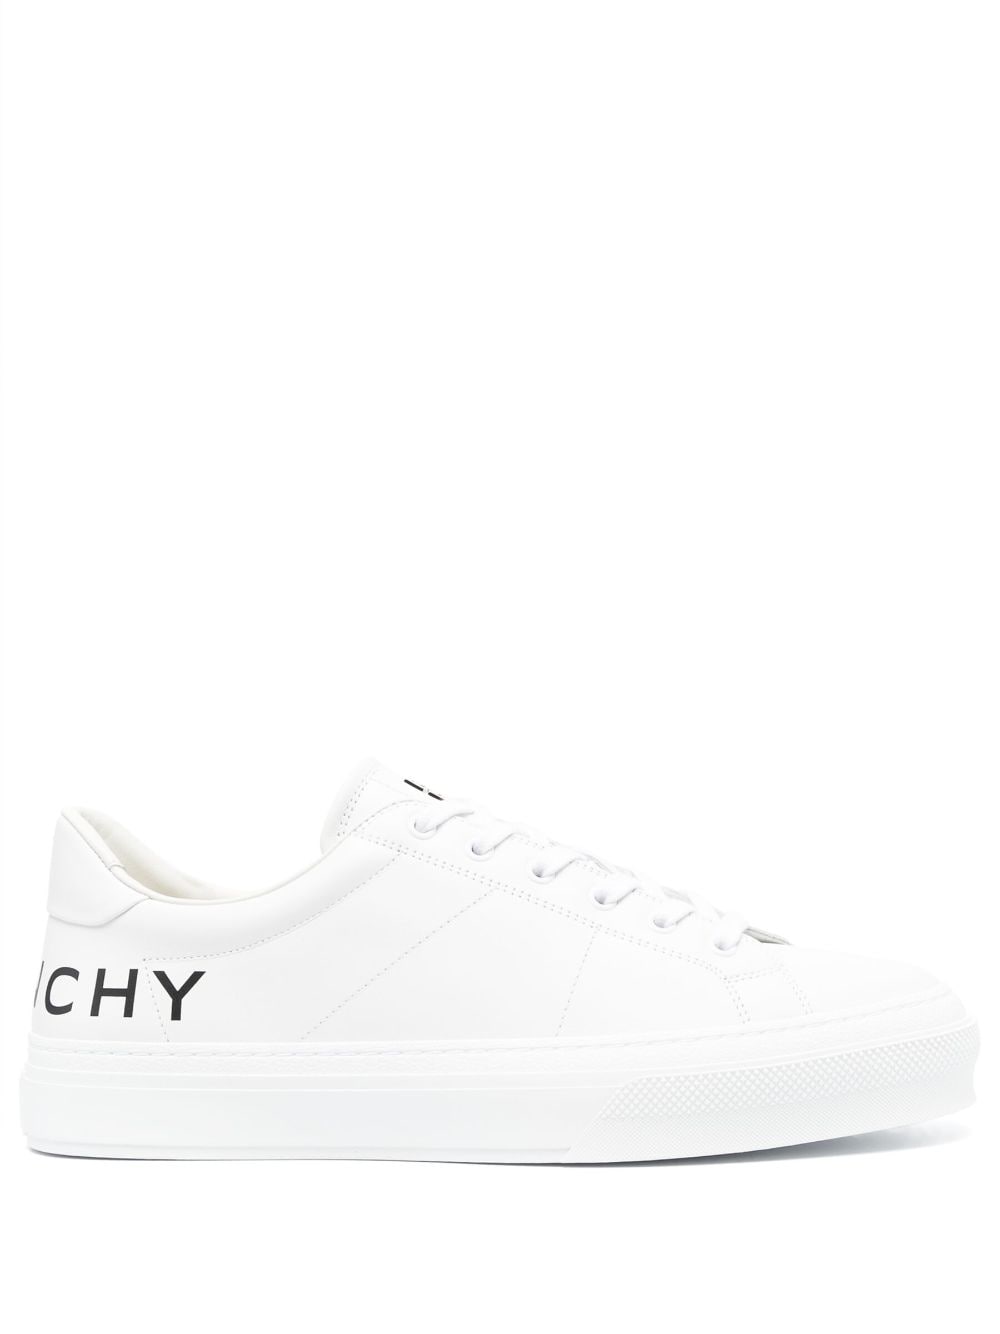 Givenchy logo-print leather sneakers - White von Givenchy